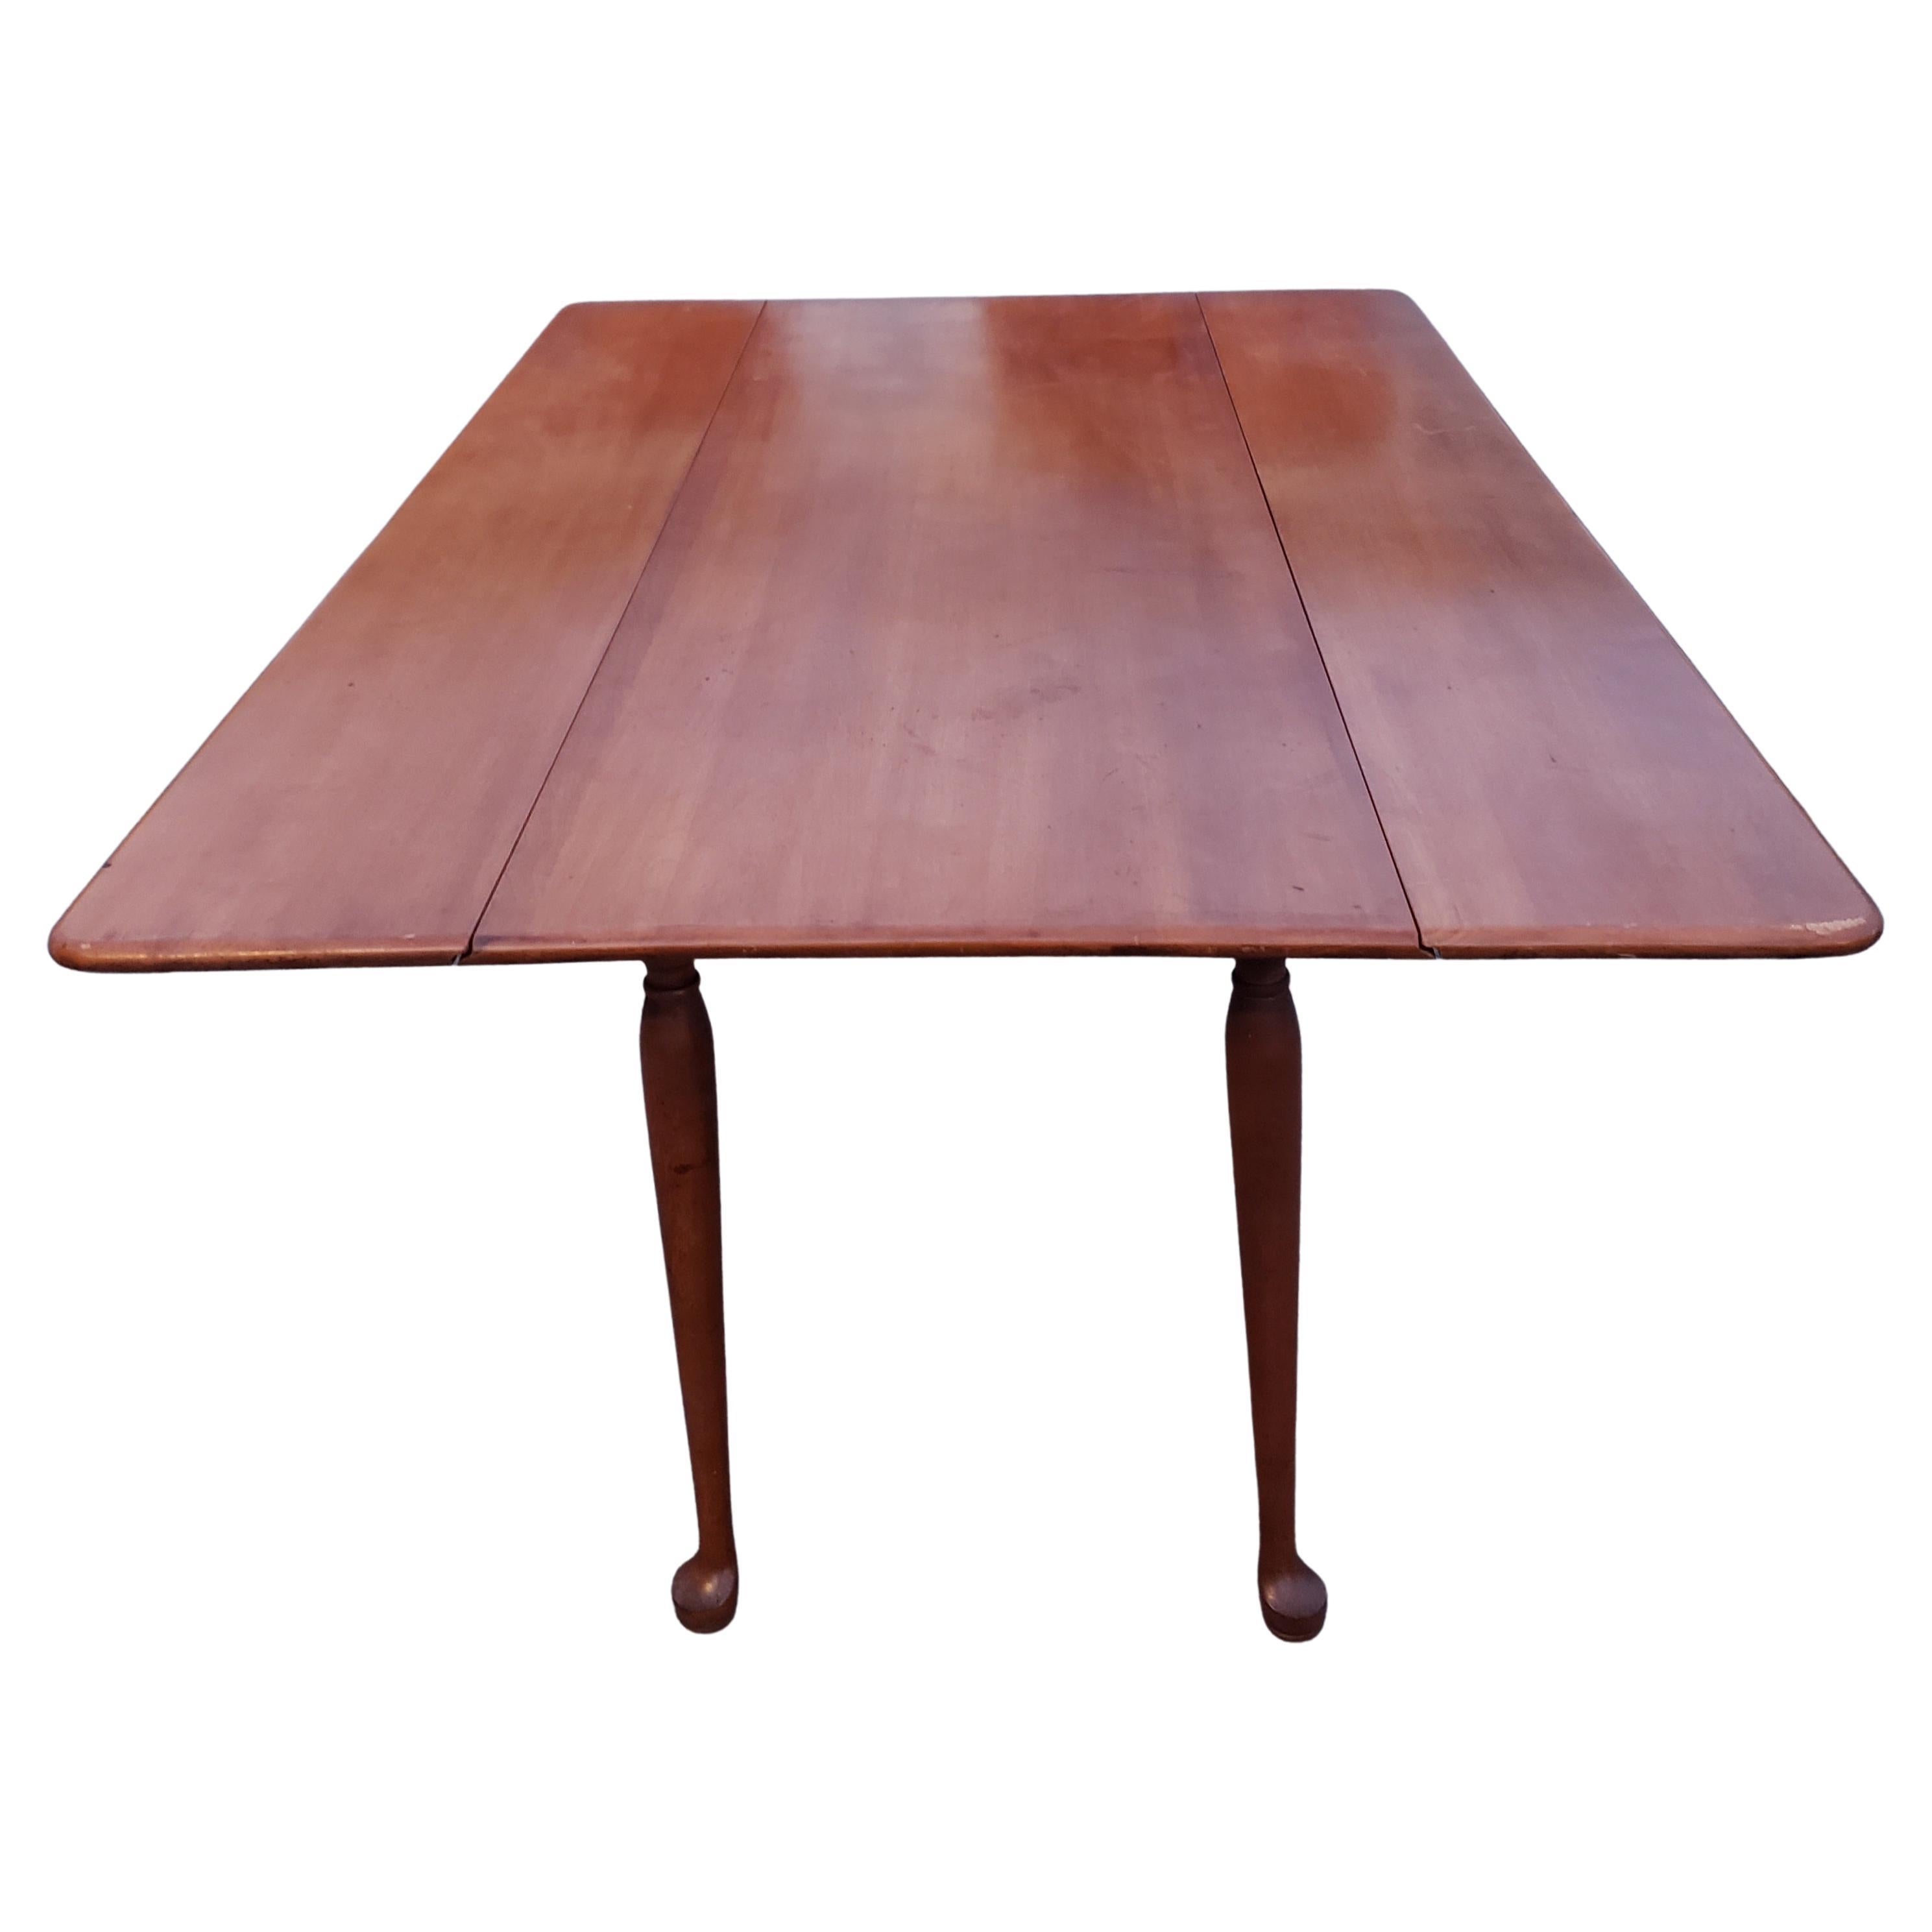 rockport maple table